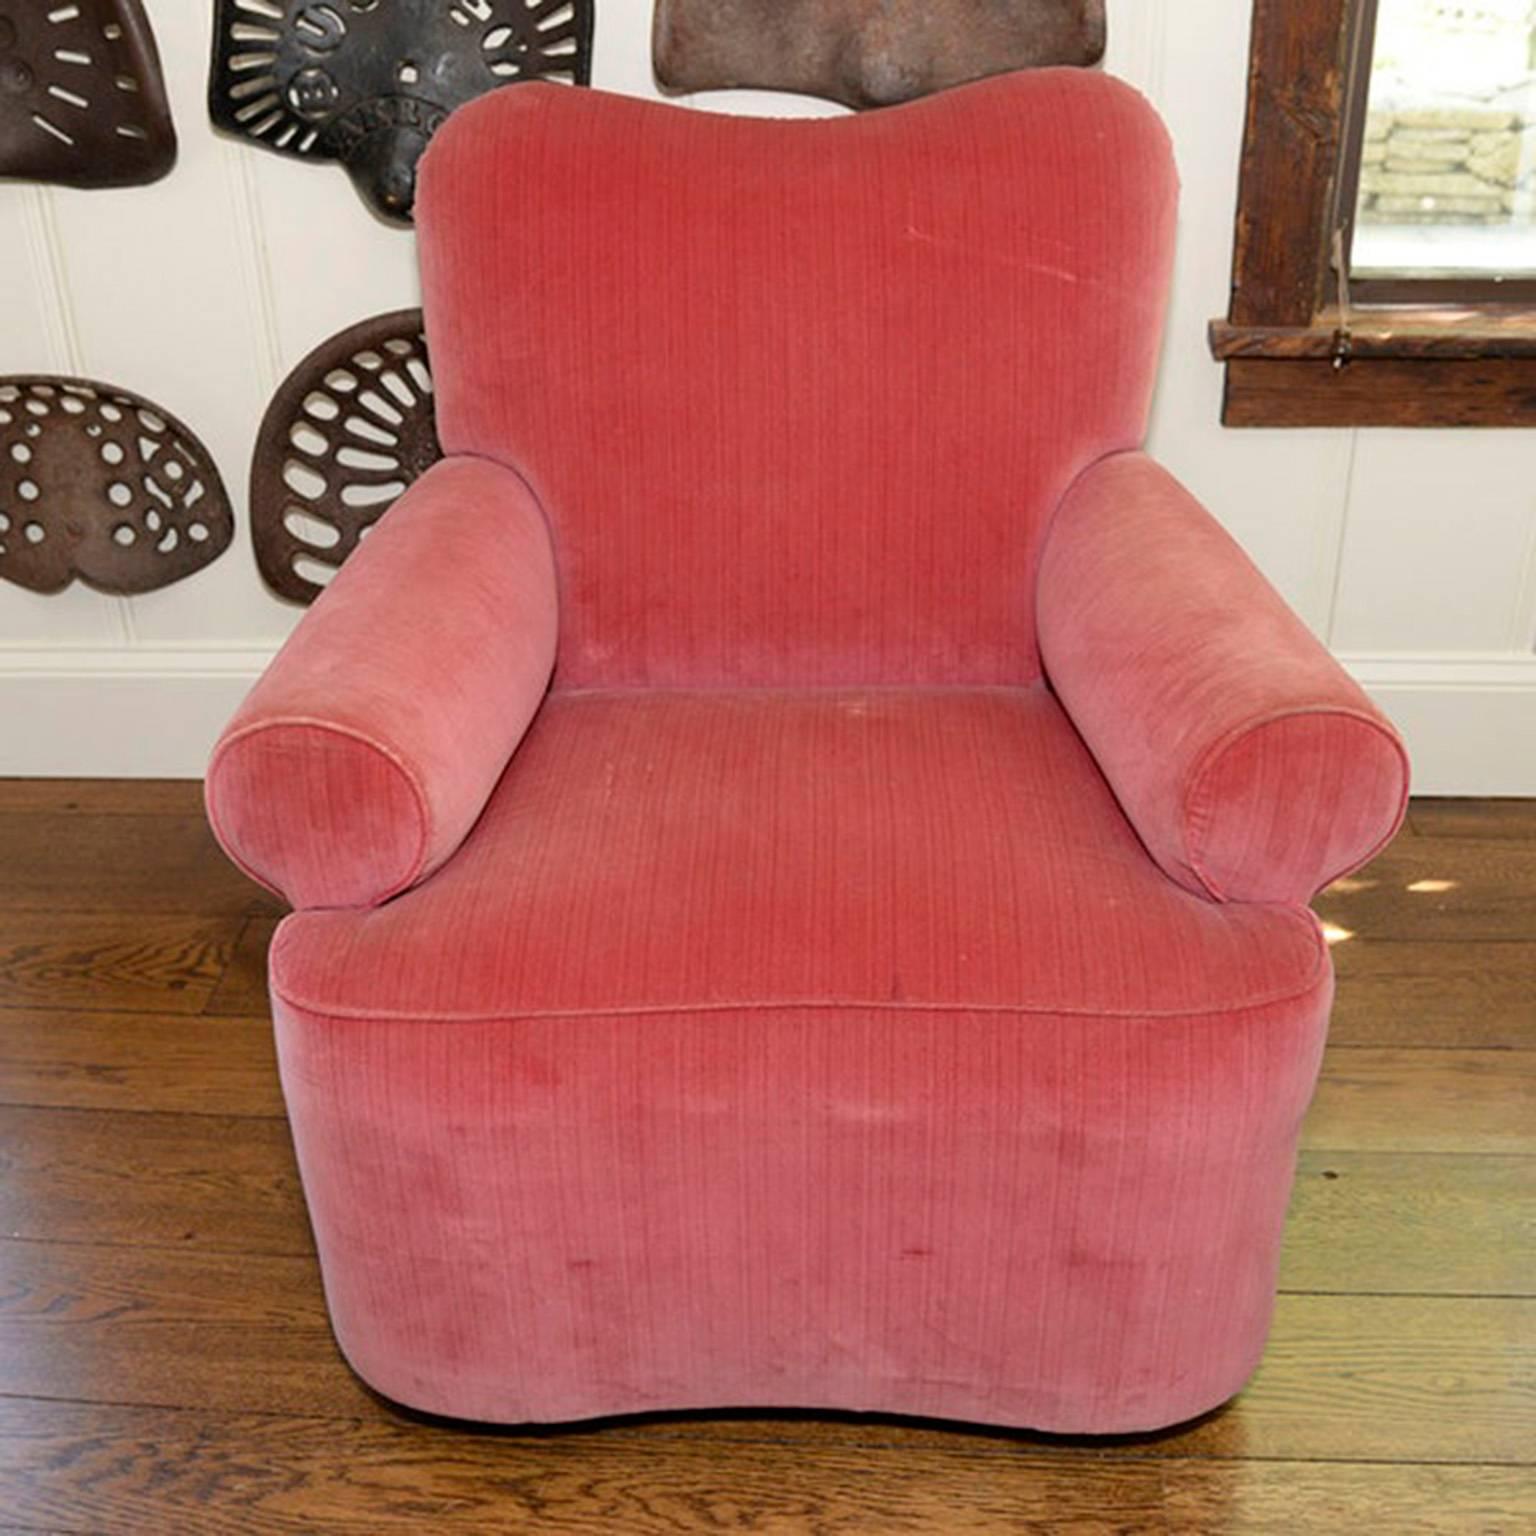 A fuchsia velour swivel chair in Muriel Brandolini style. The unique chair has bolster arms, upholstered in a strie velour fabric with coordinating piping at the seams. Slight wear on the welting.